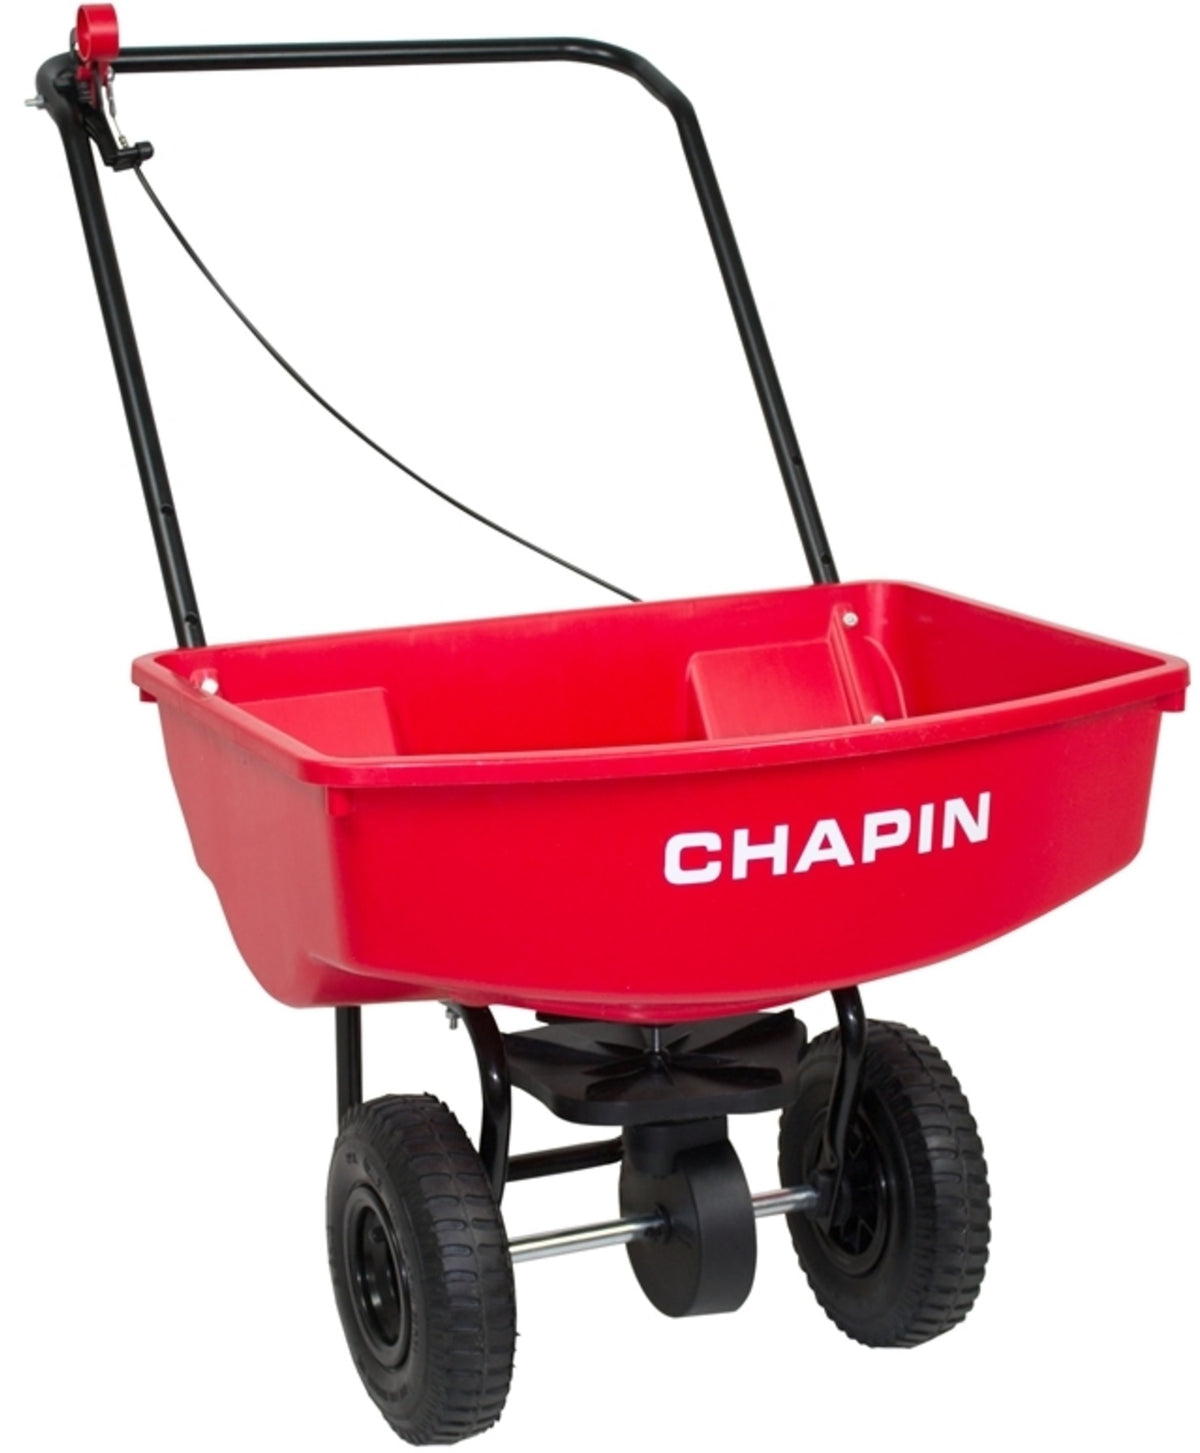 Chapin 8001A Lawn Spreader, 70 Lbs